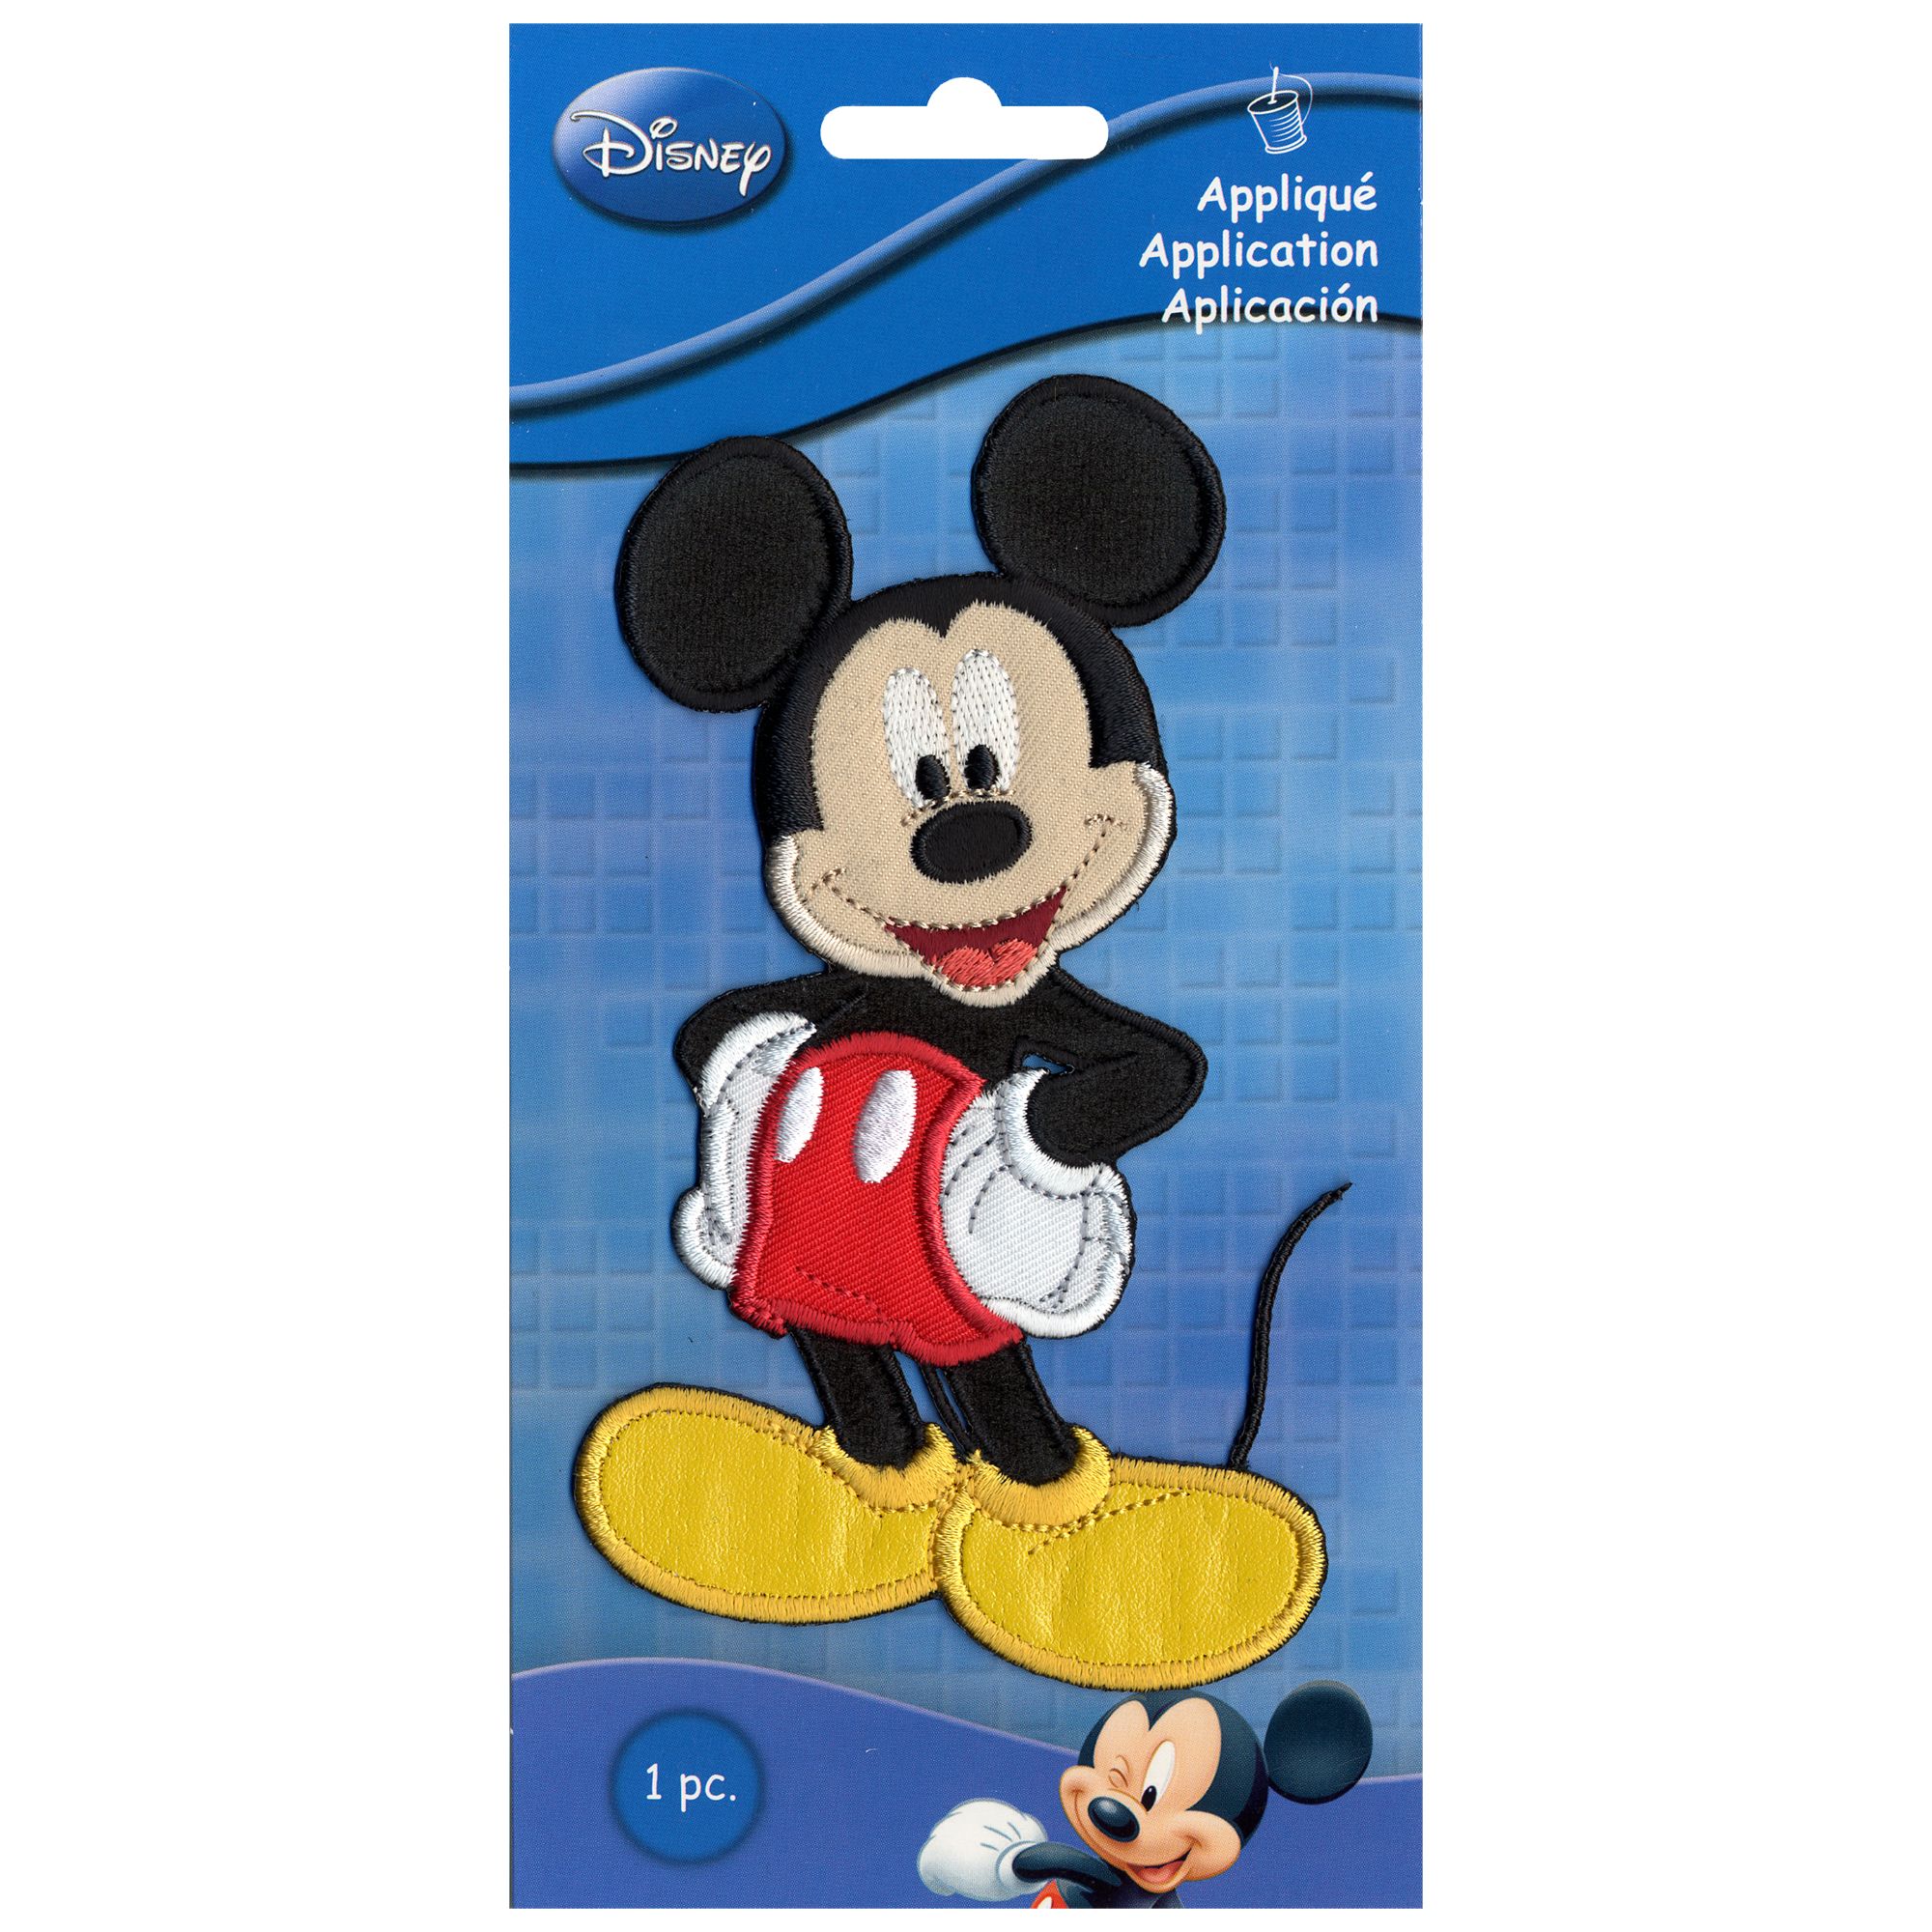 Simplicity Disney Mickey Mouse Iron On Patch, Black